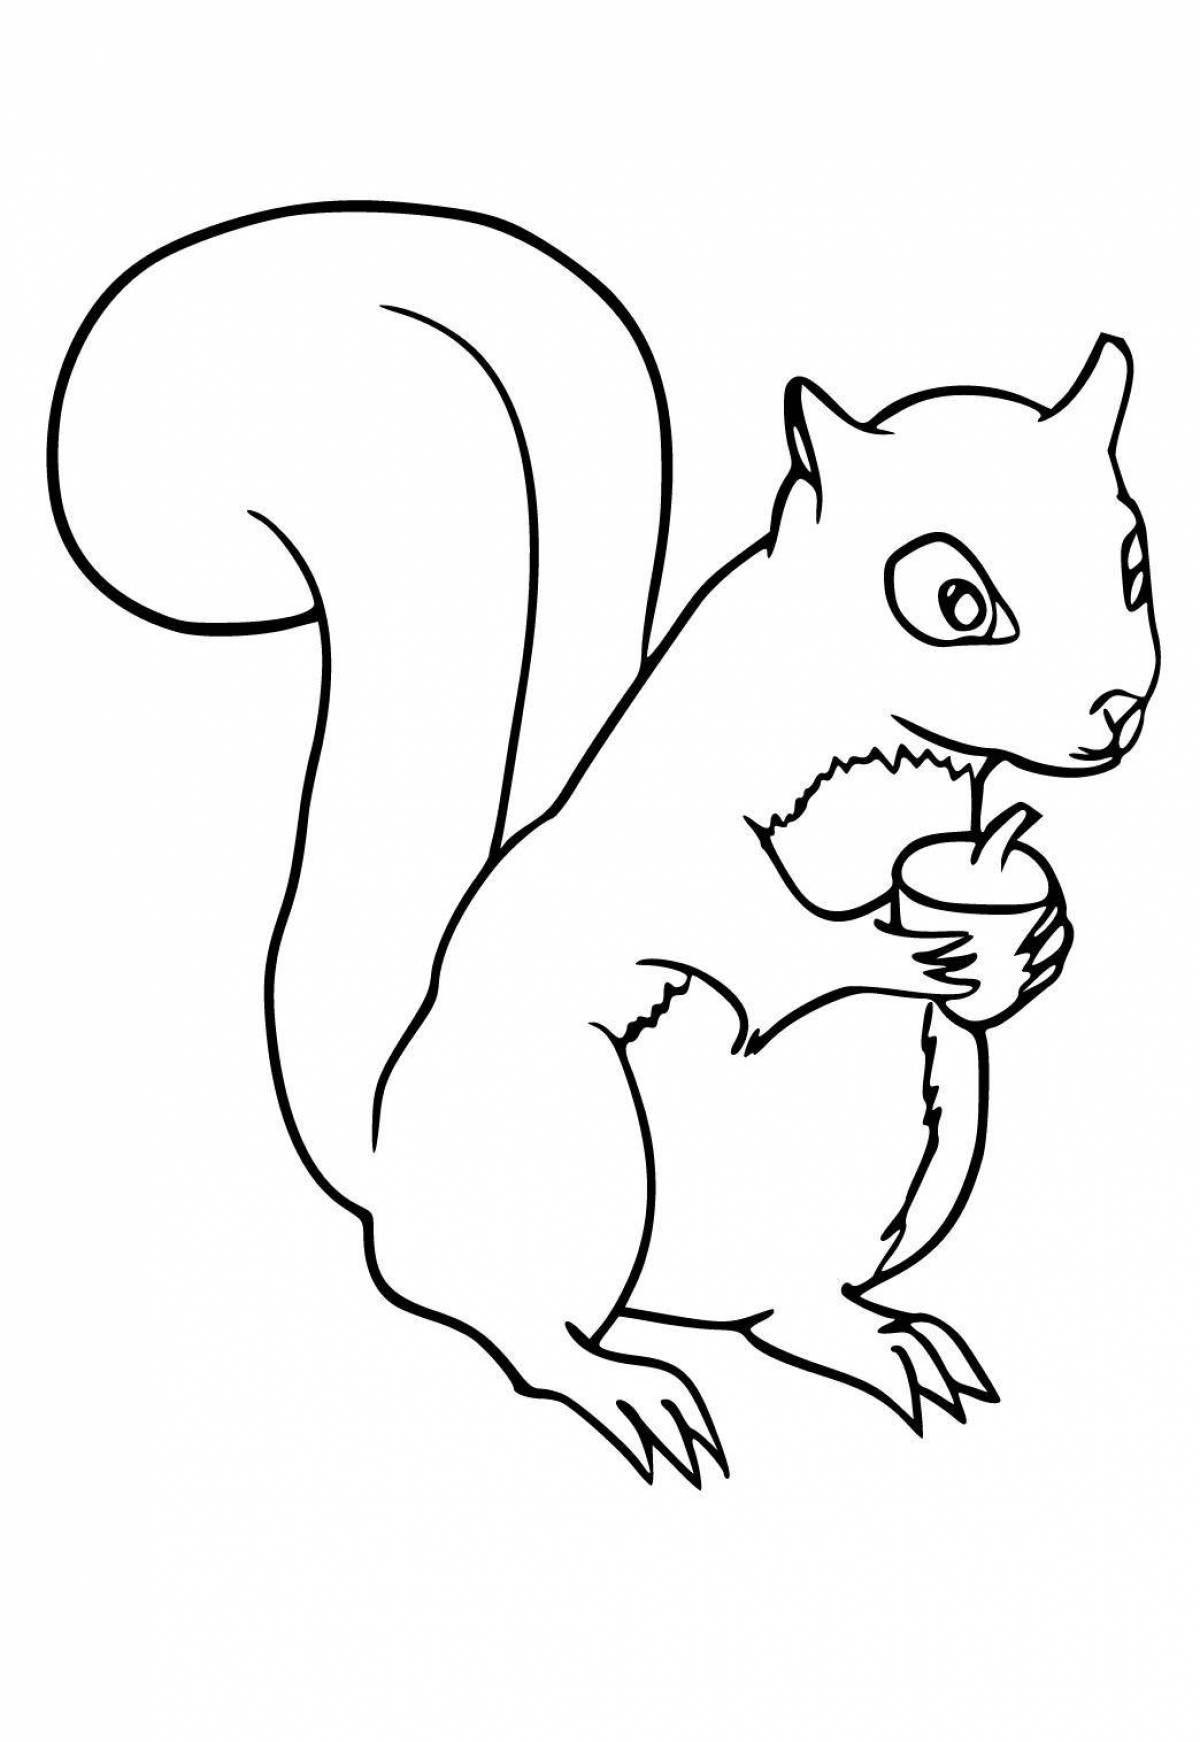 Witty little squirrel coloring book